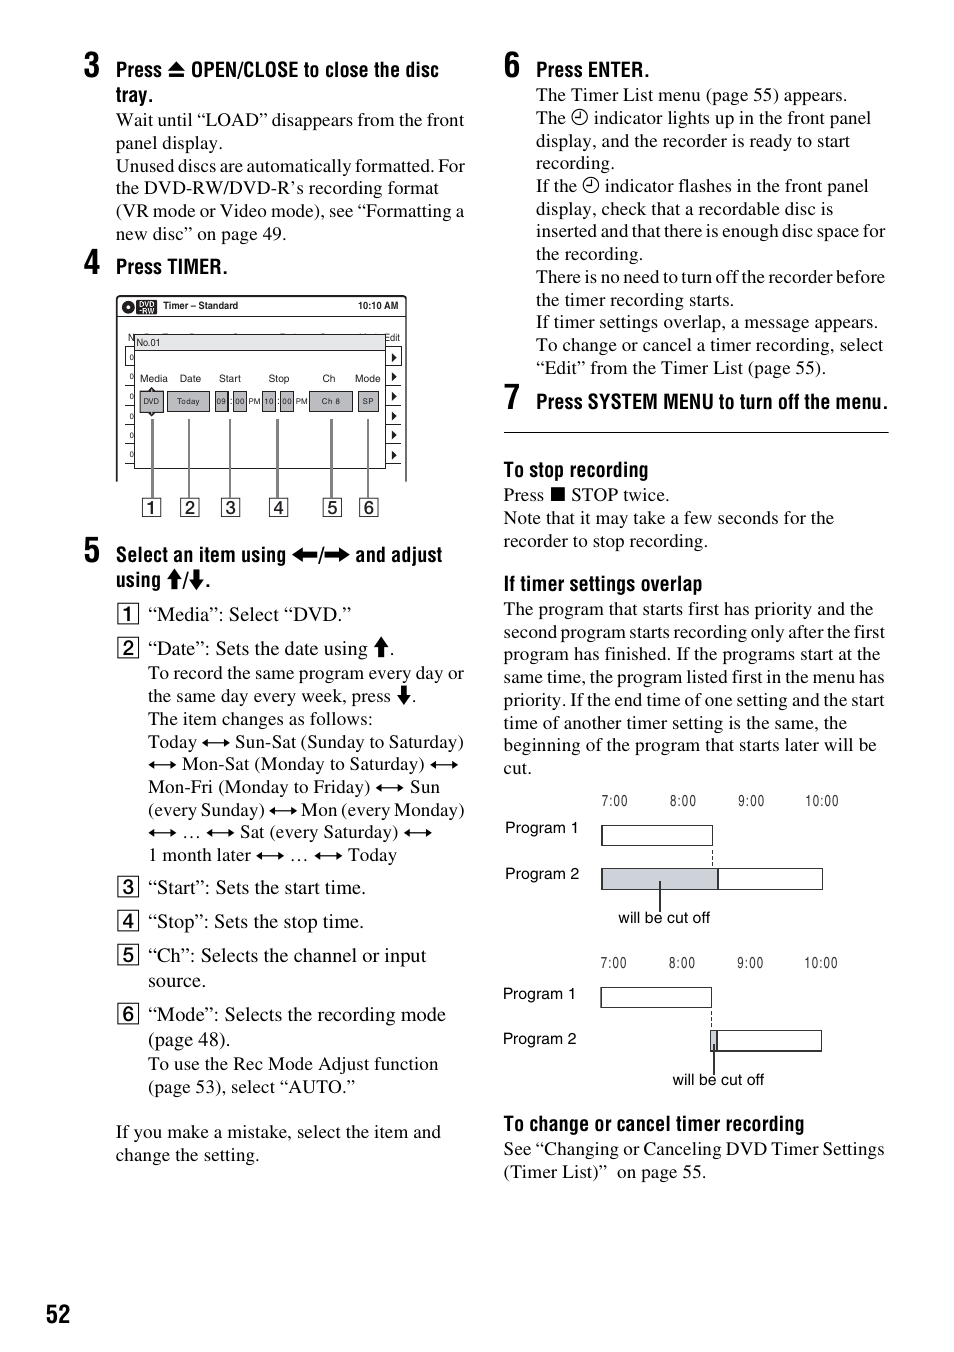 Press z open/close to close the disc tray, Press timer, Press enter | If timer settings overlap | Sony RDR-VX521 User Manual | Page 52 / 132